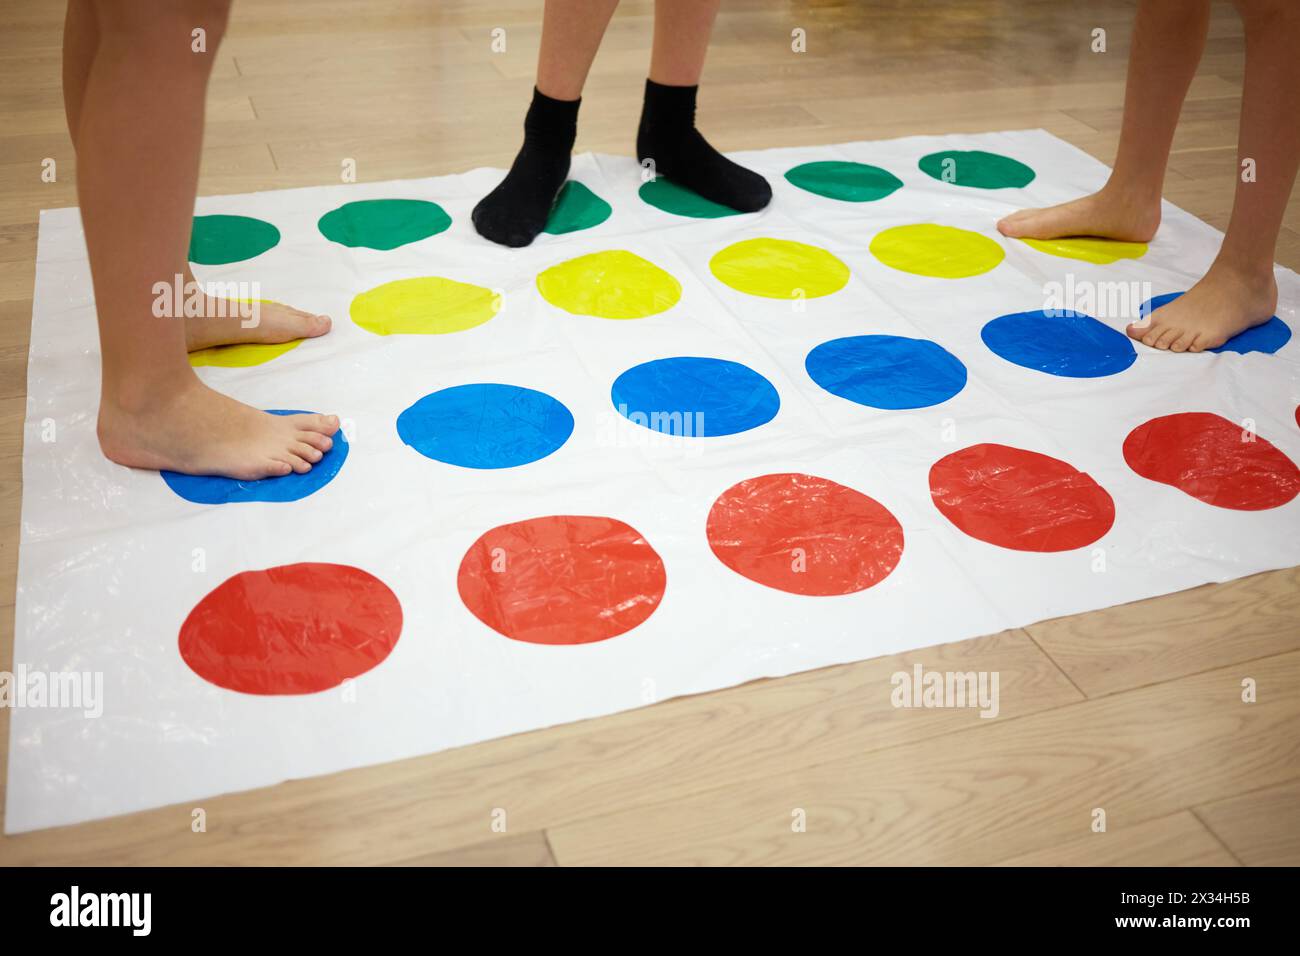 MOSCOW, RUSSIA - MAY 8, 2015: Children play Twister game in room. Twister is a game of physical skill produced by Milton Bradley Company and Winning M Stock Photo